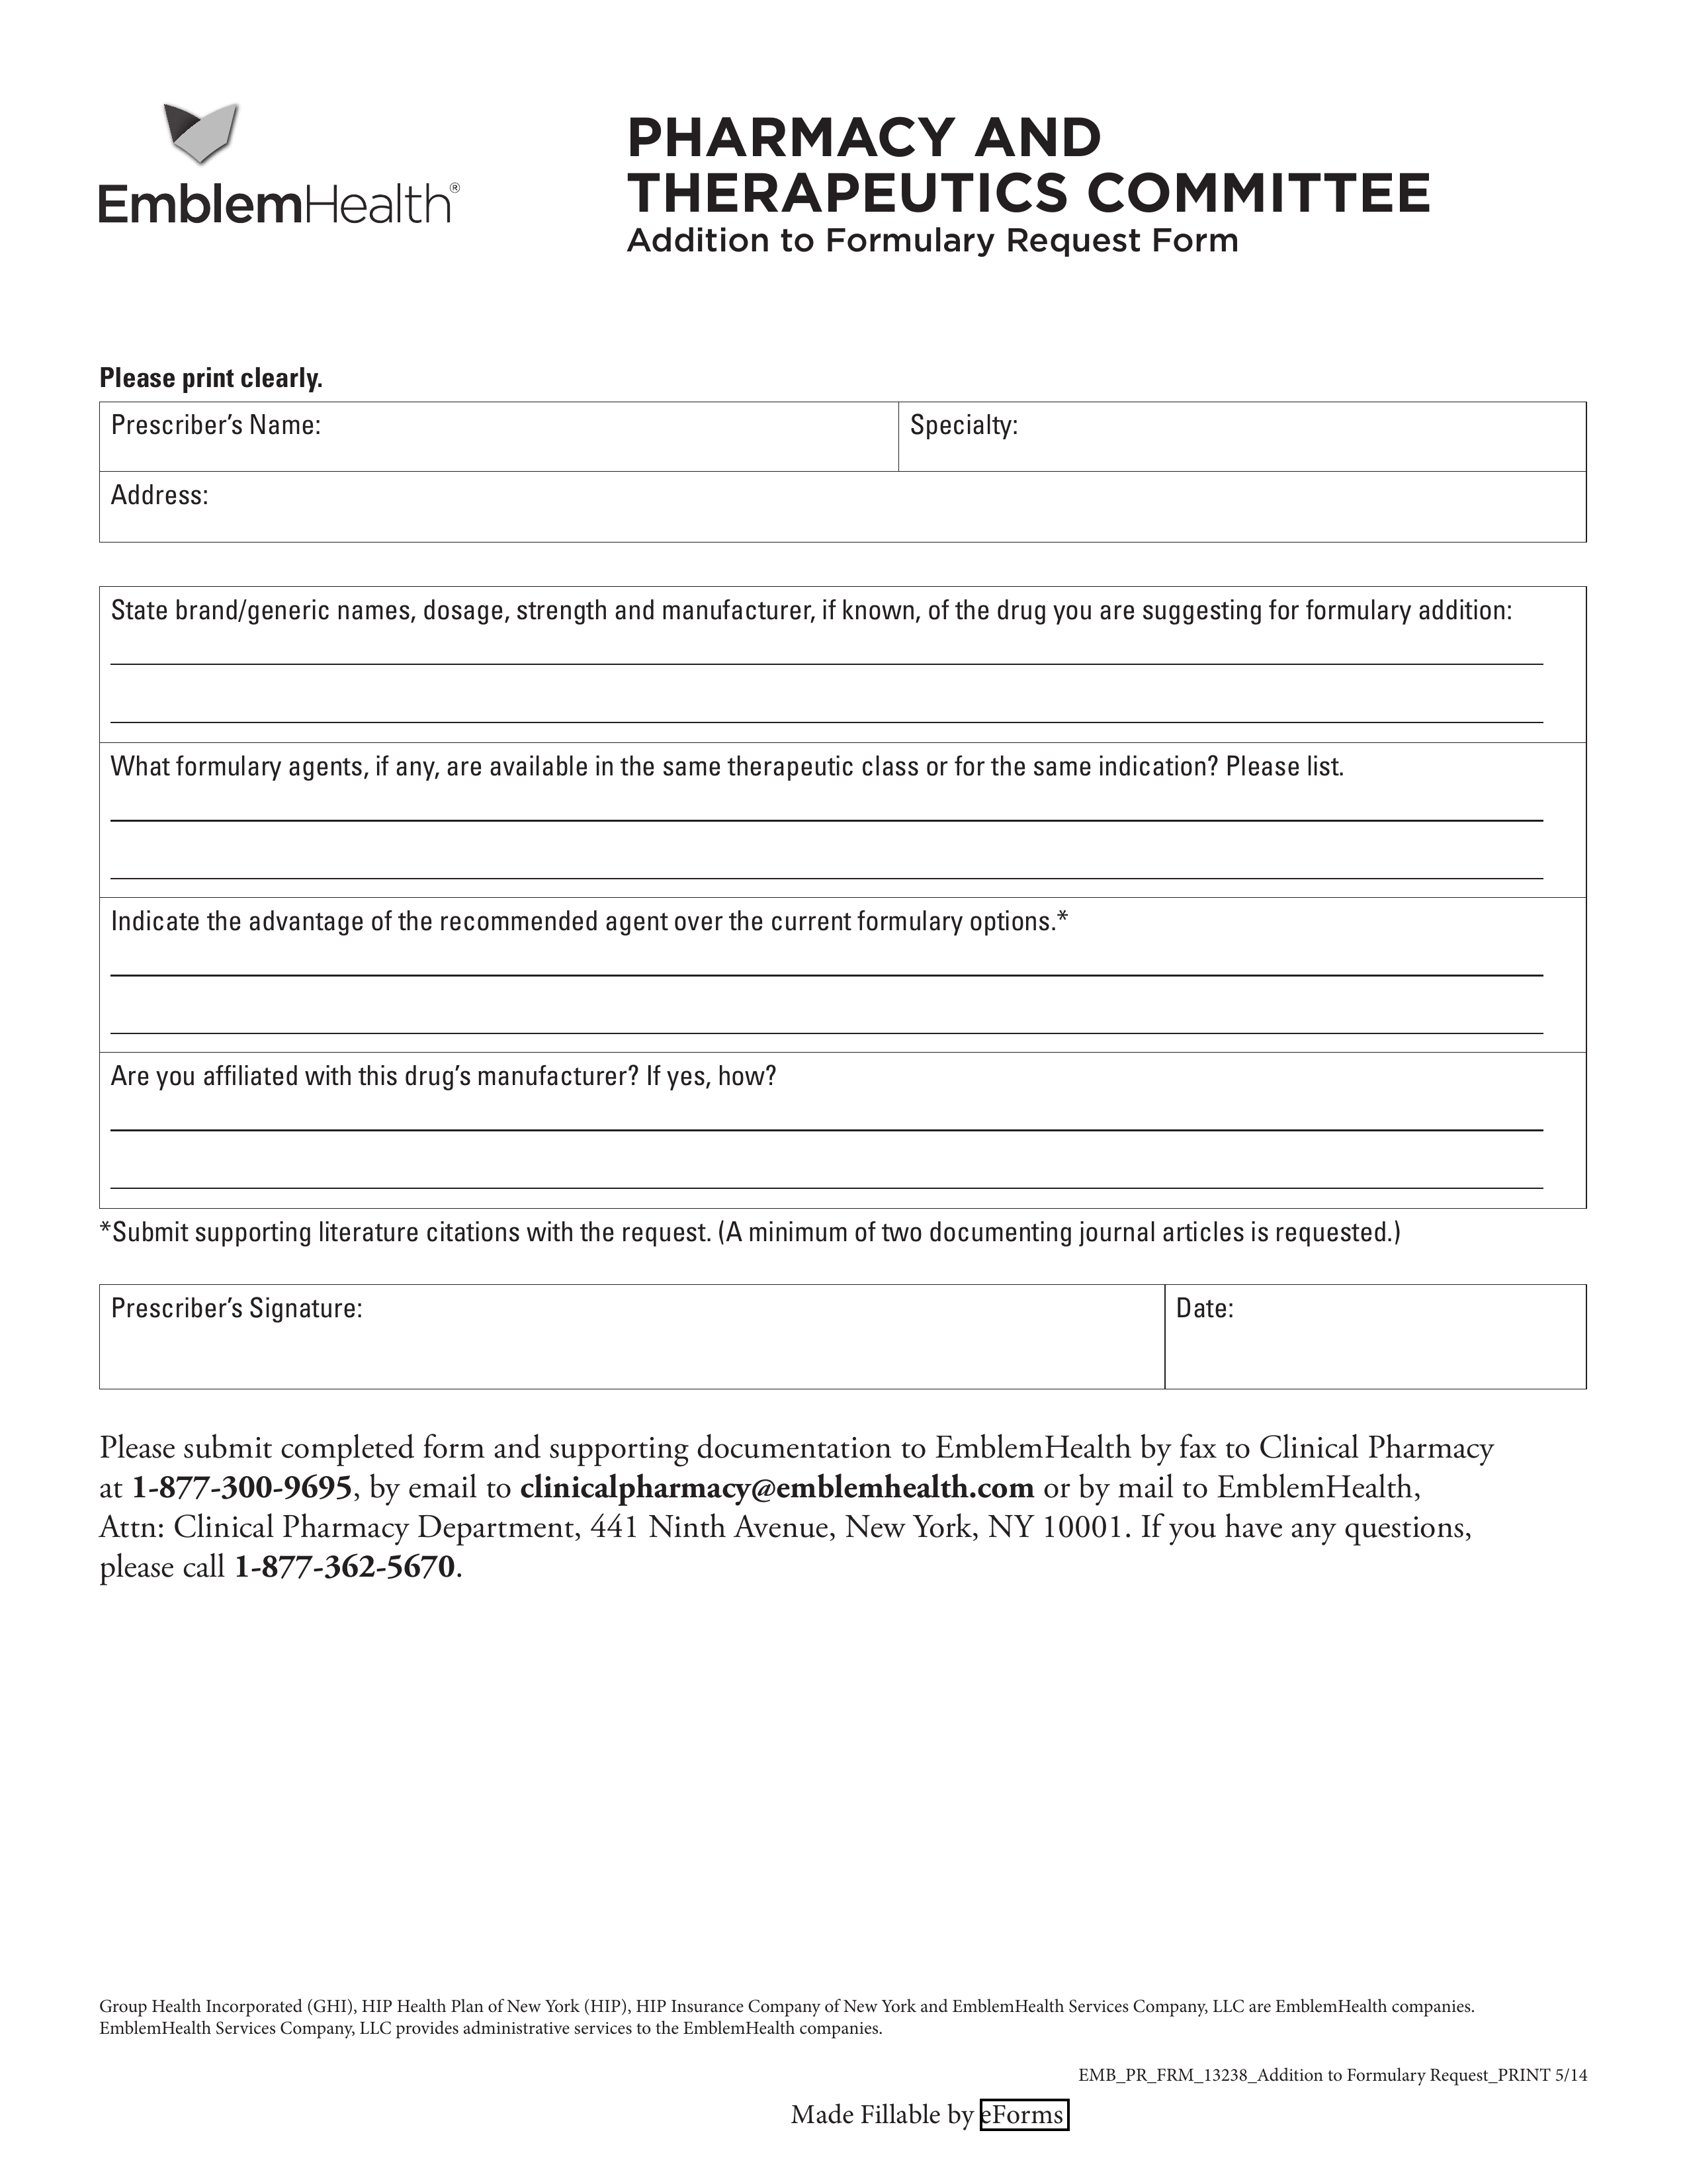 EmblemHealth Prior (Rx) Authorization Form